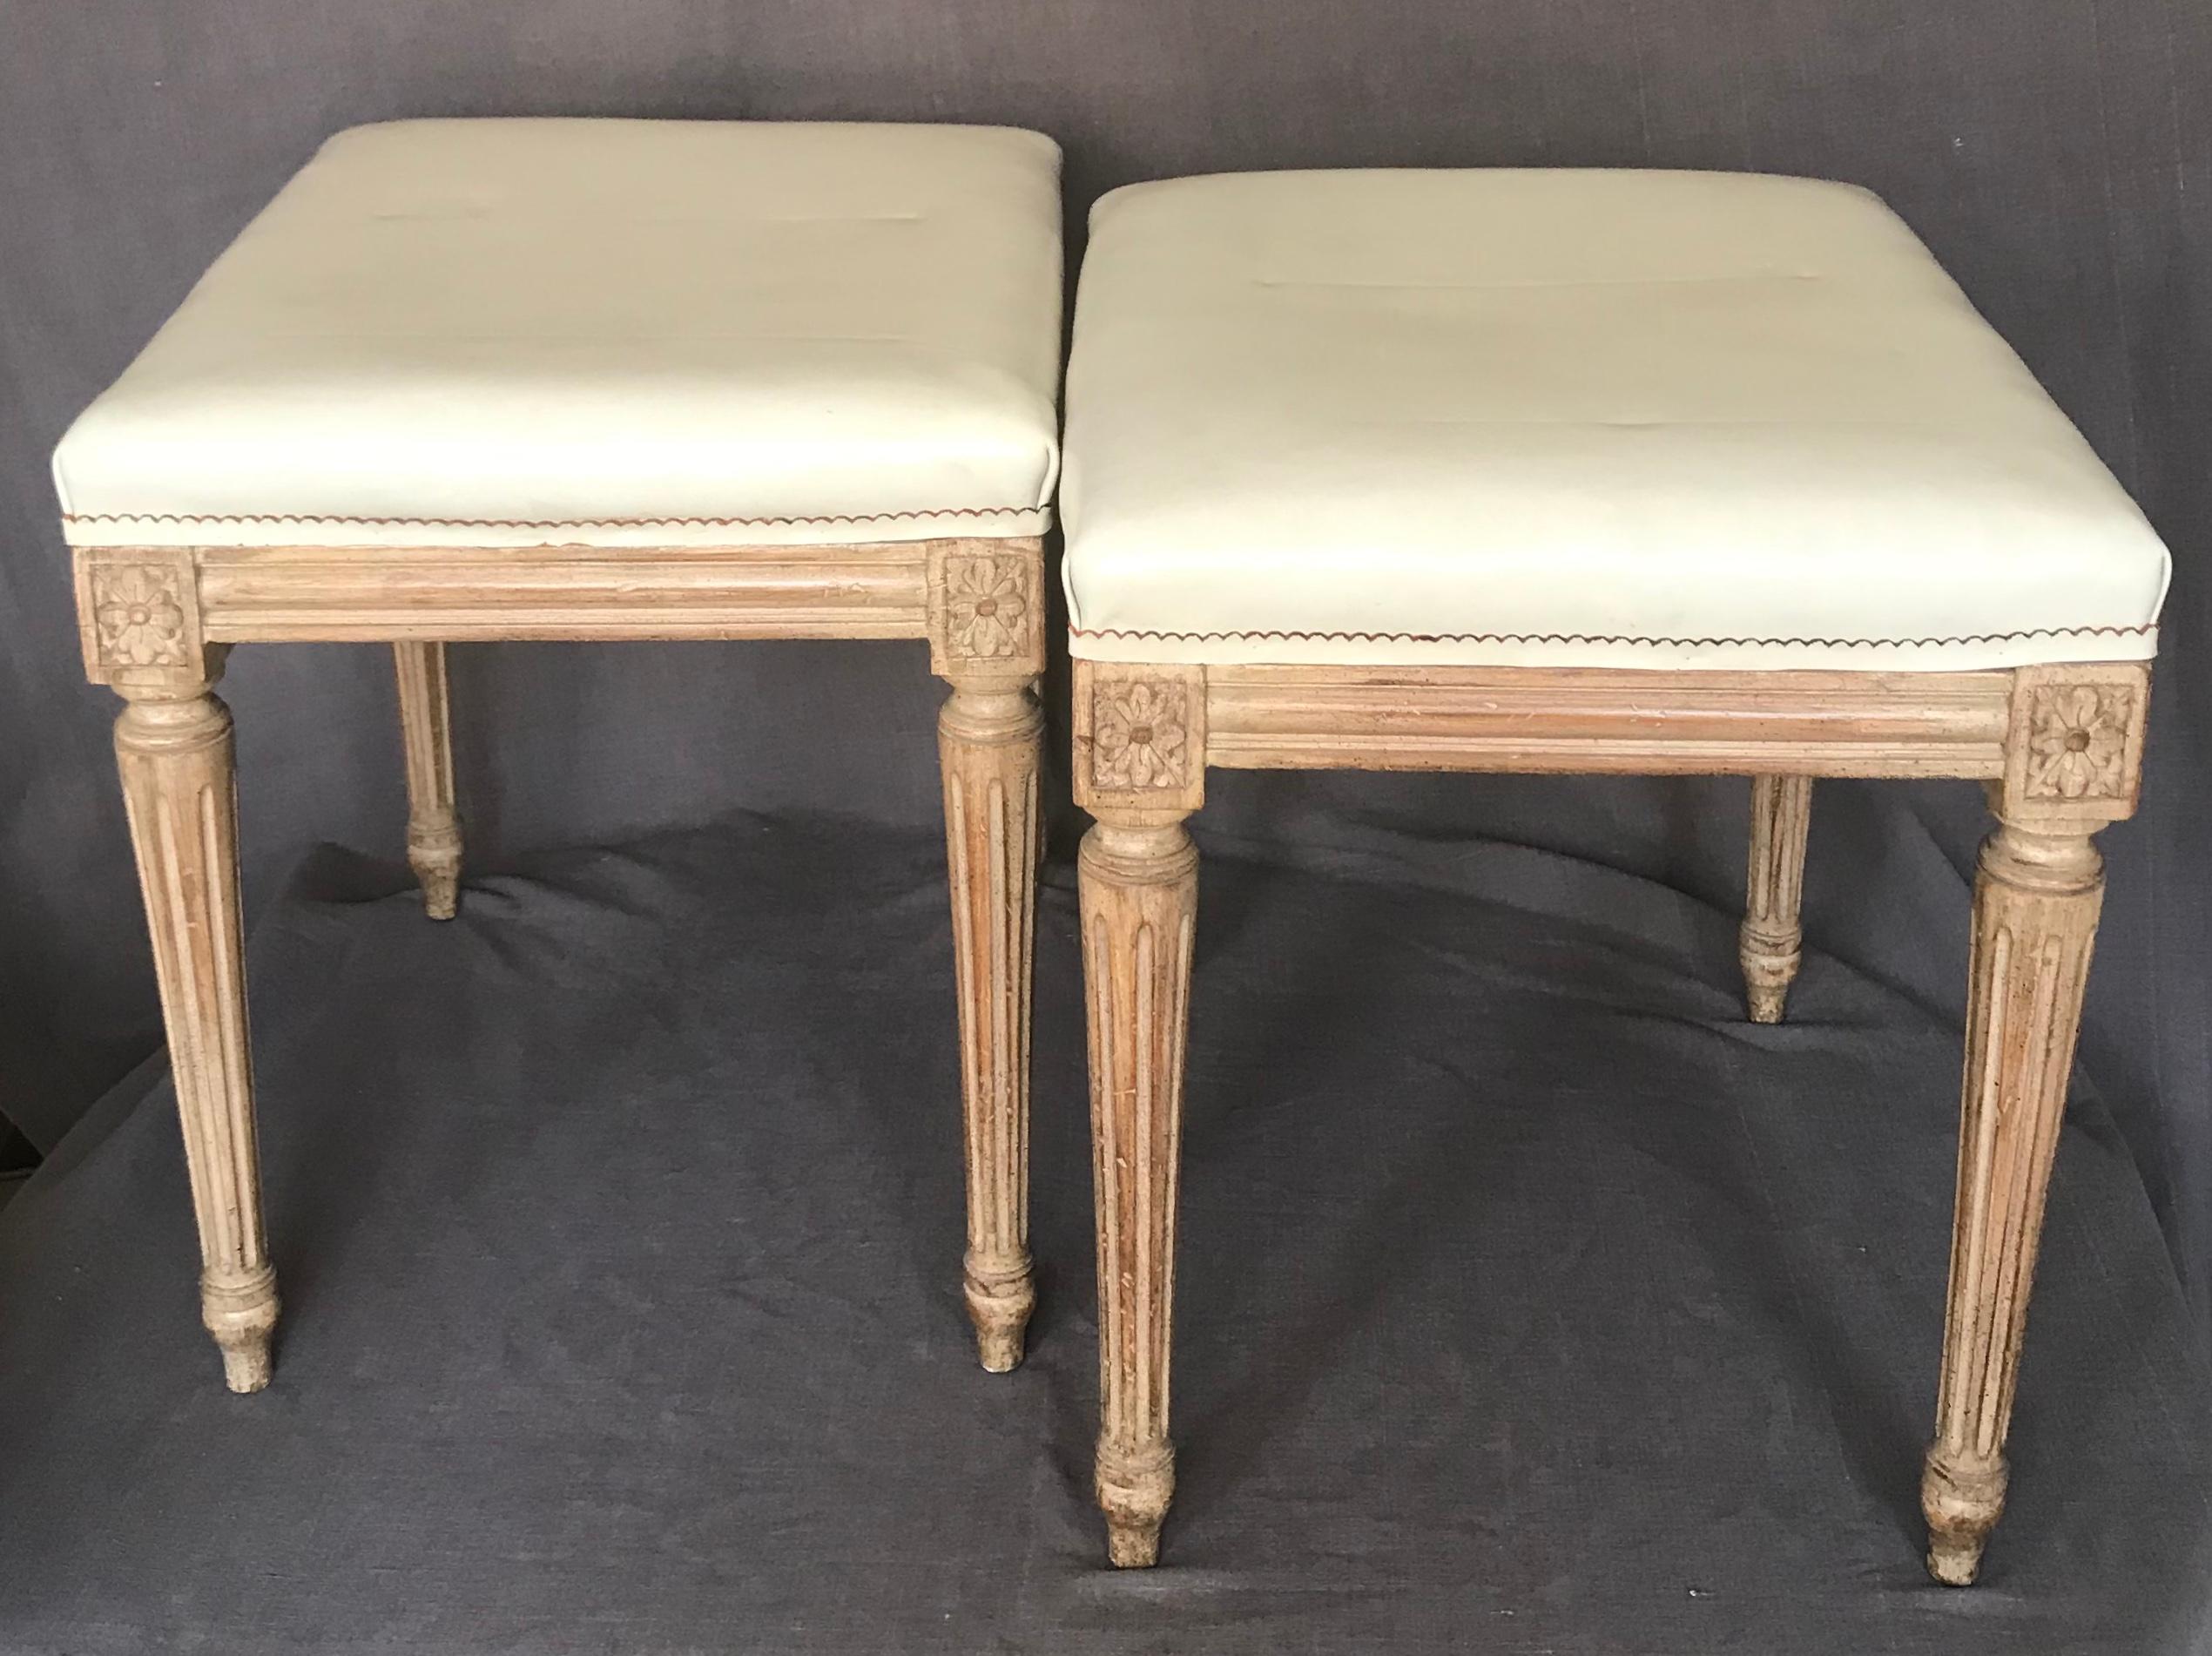 Pair of midcentury Louis XVI stools in the manner of Jansen. Urbane pair pale carved wood stools with reeded legs covered in original chic cream Naugahyde, France, circa 1940.
Dimensions: 14” D x 17” W x 17.5” H.